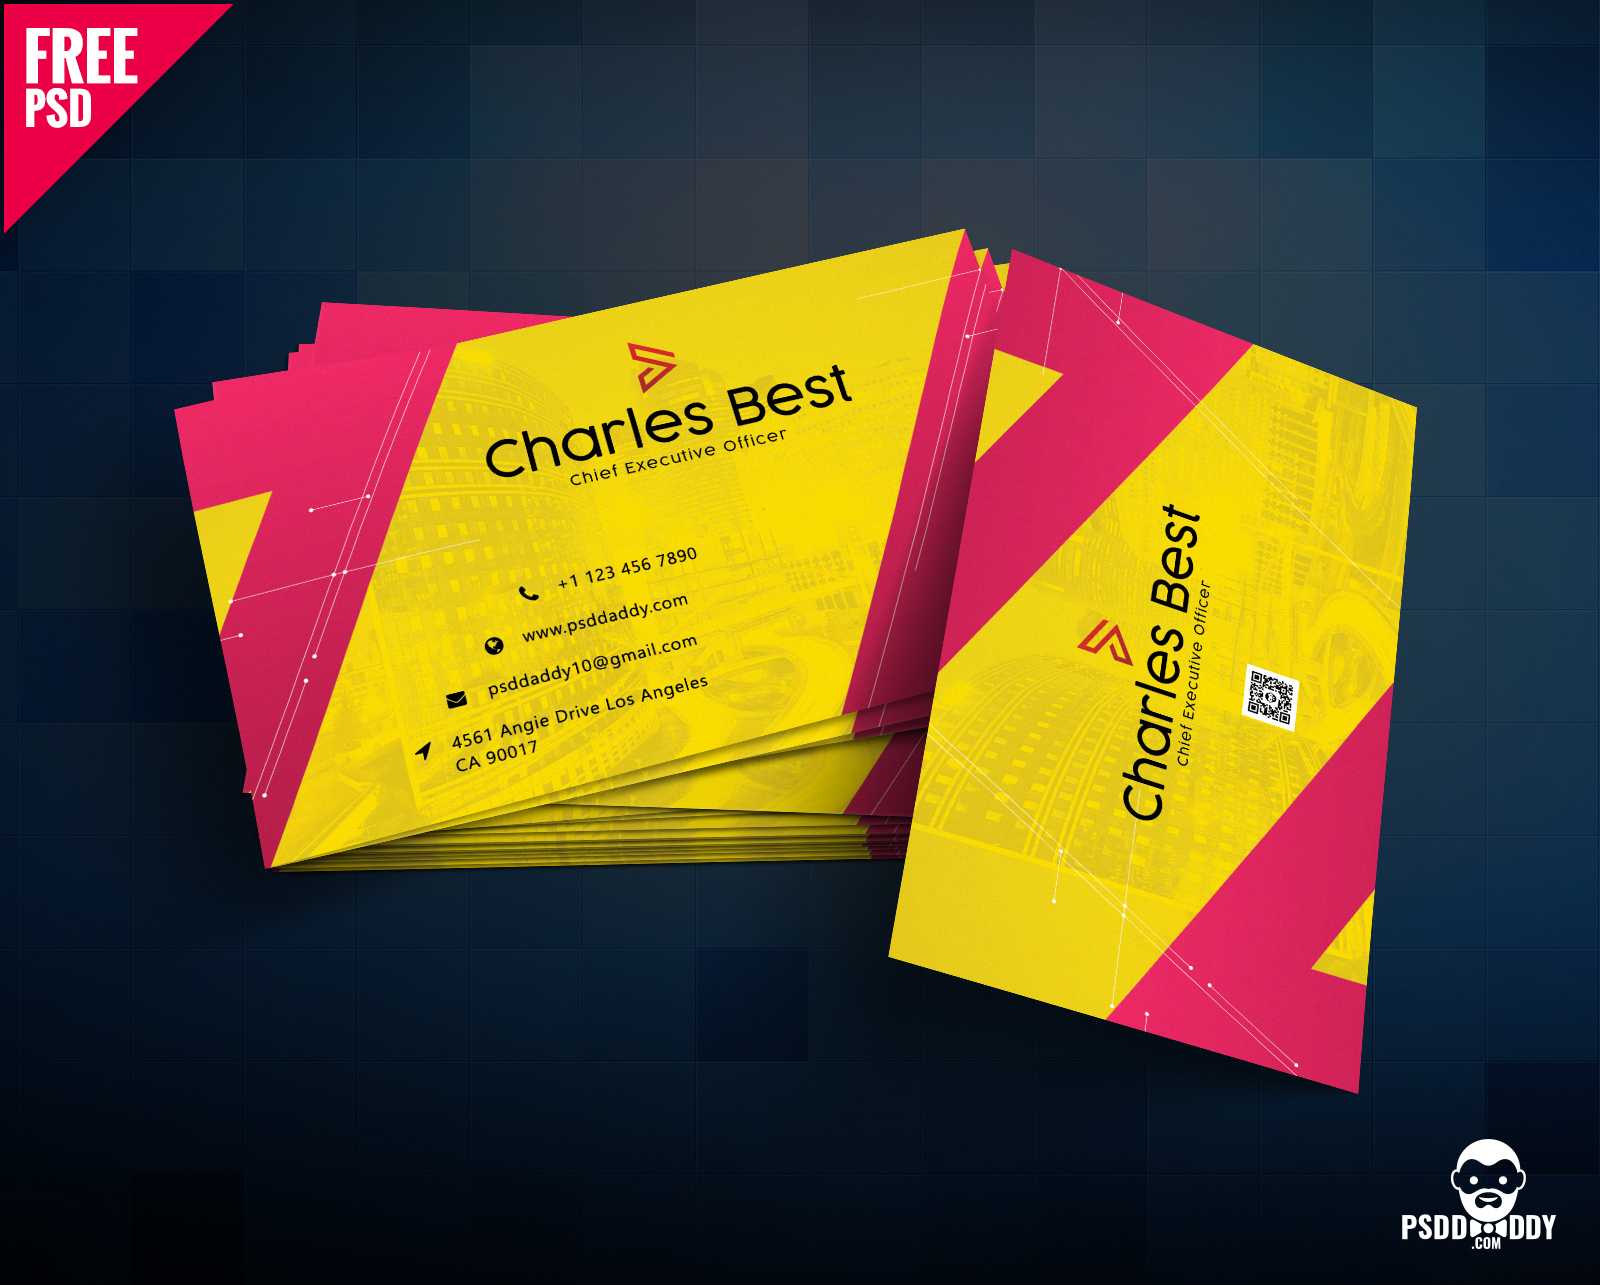 Download] Creative Business Card Free Psd | Psddaddy Pertaining To Visiting Card Template Psd Free Download